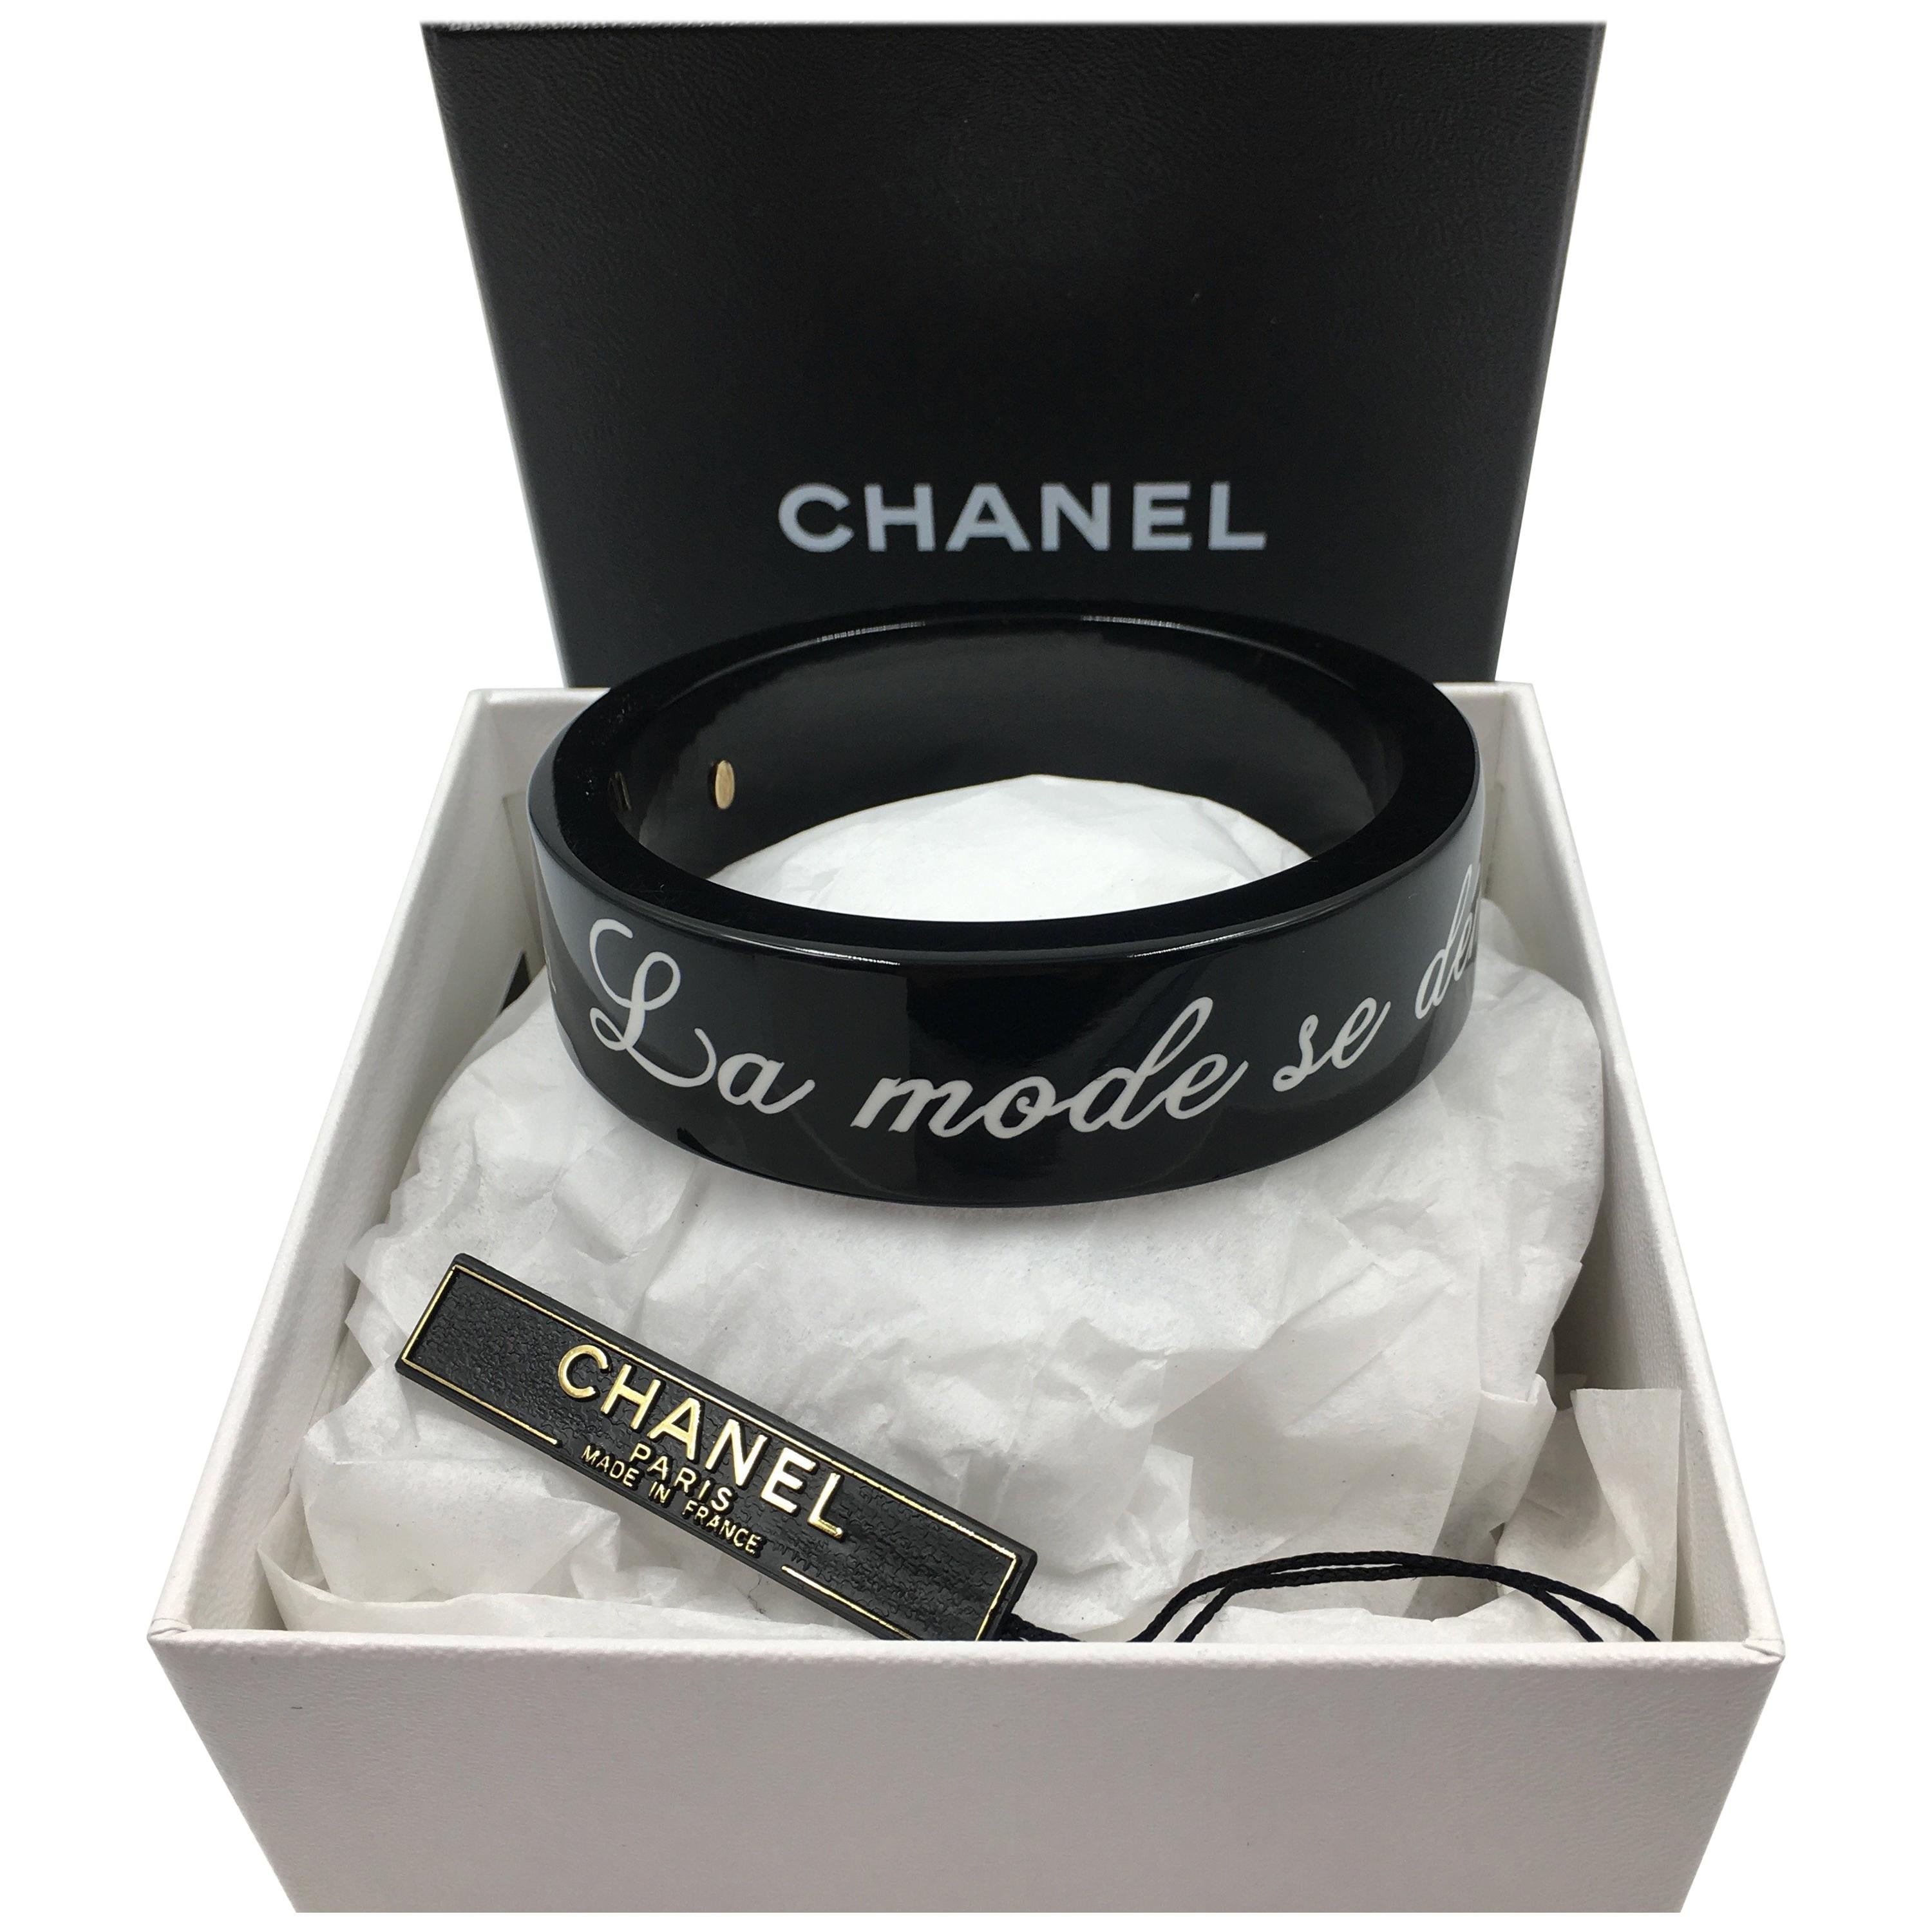 Chanel Black Logo Bangle - La Mode se Demode. Le Style Jamais Coco Chanel. Stamped Chanel inside. Made in France. Very good vintage condition. No scratches. 

Measurements is as follows:

Outer diameter- 3 1/8